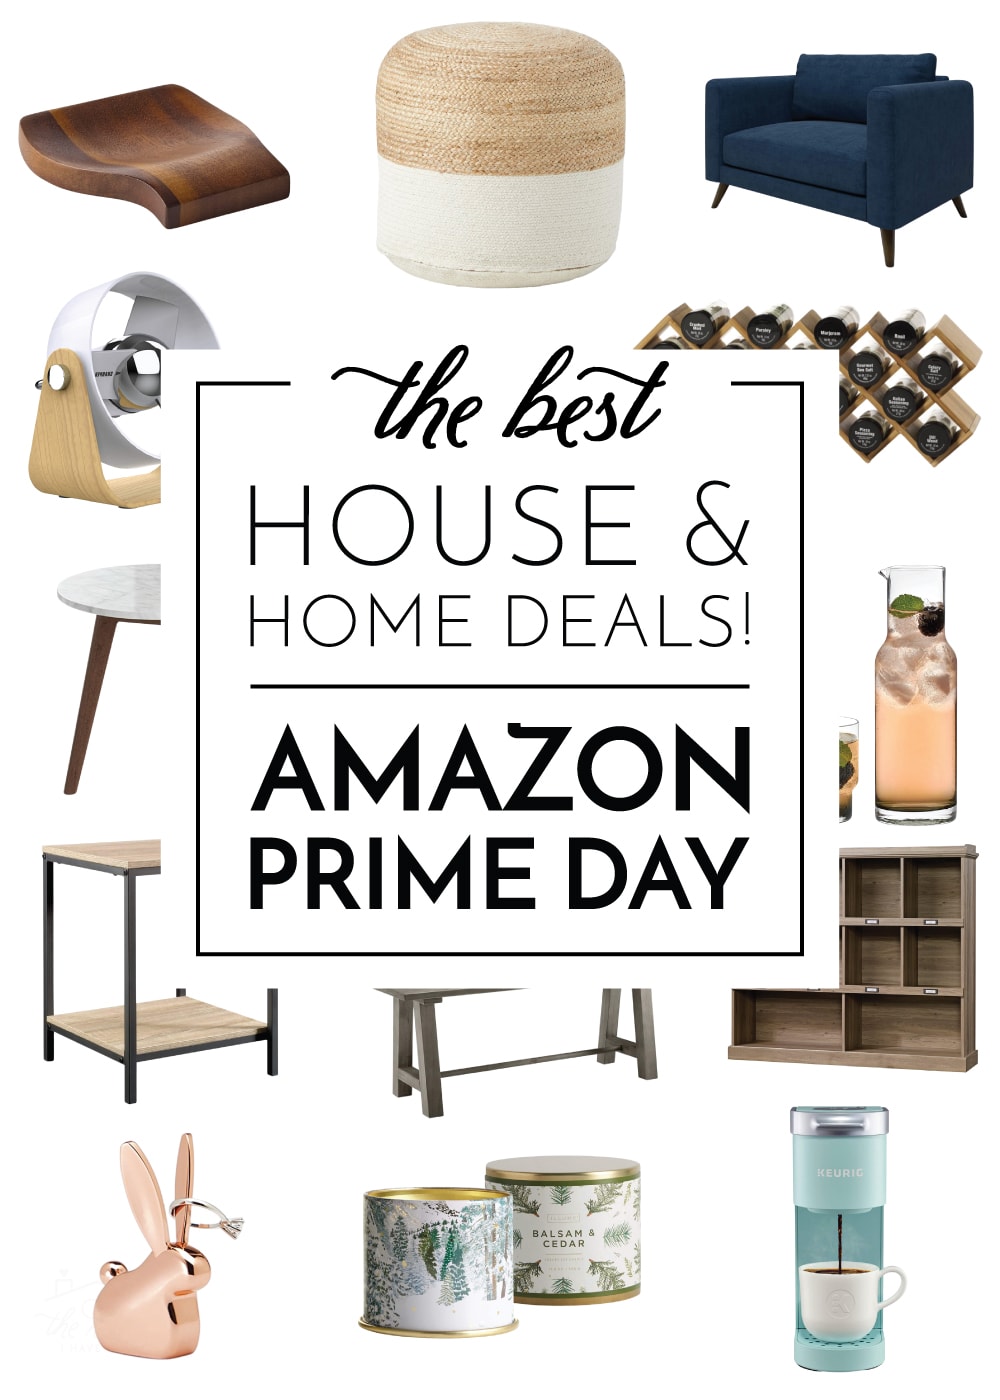 The Best Home Deals on Amazon Prime Day